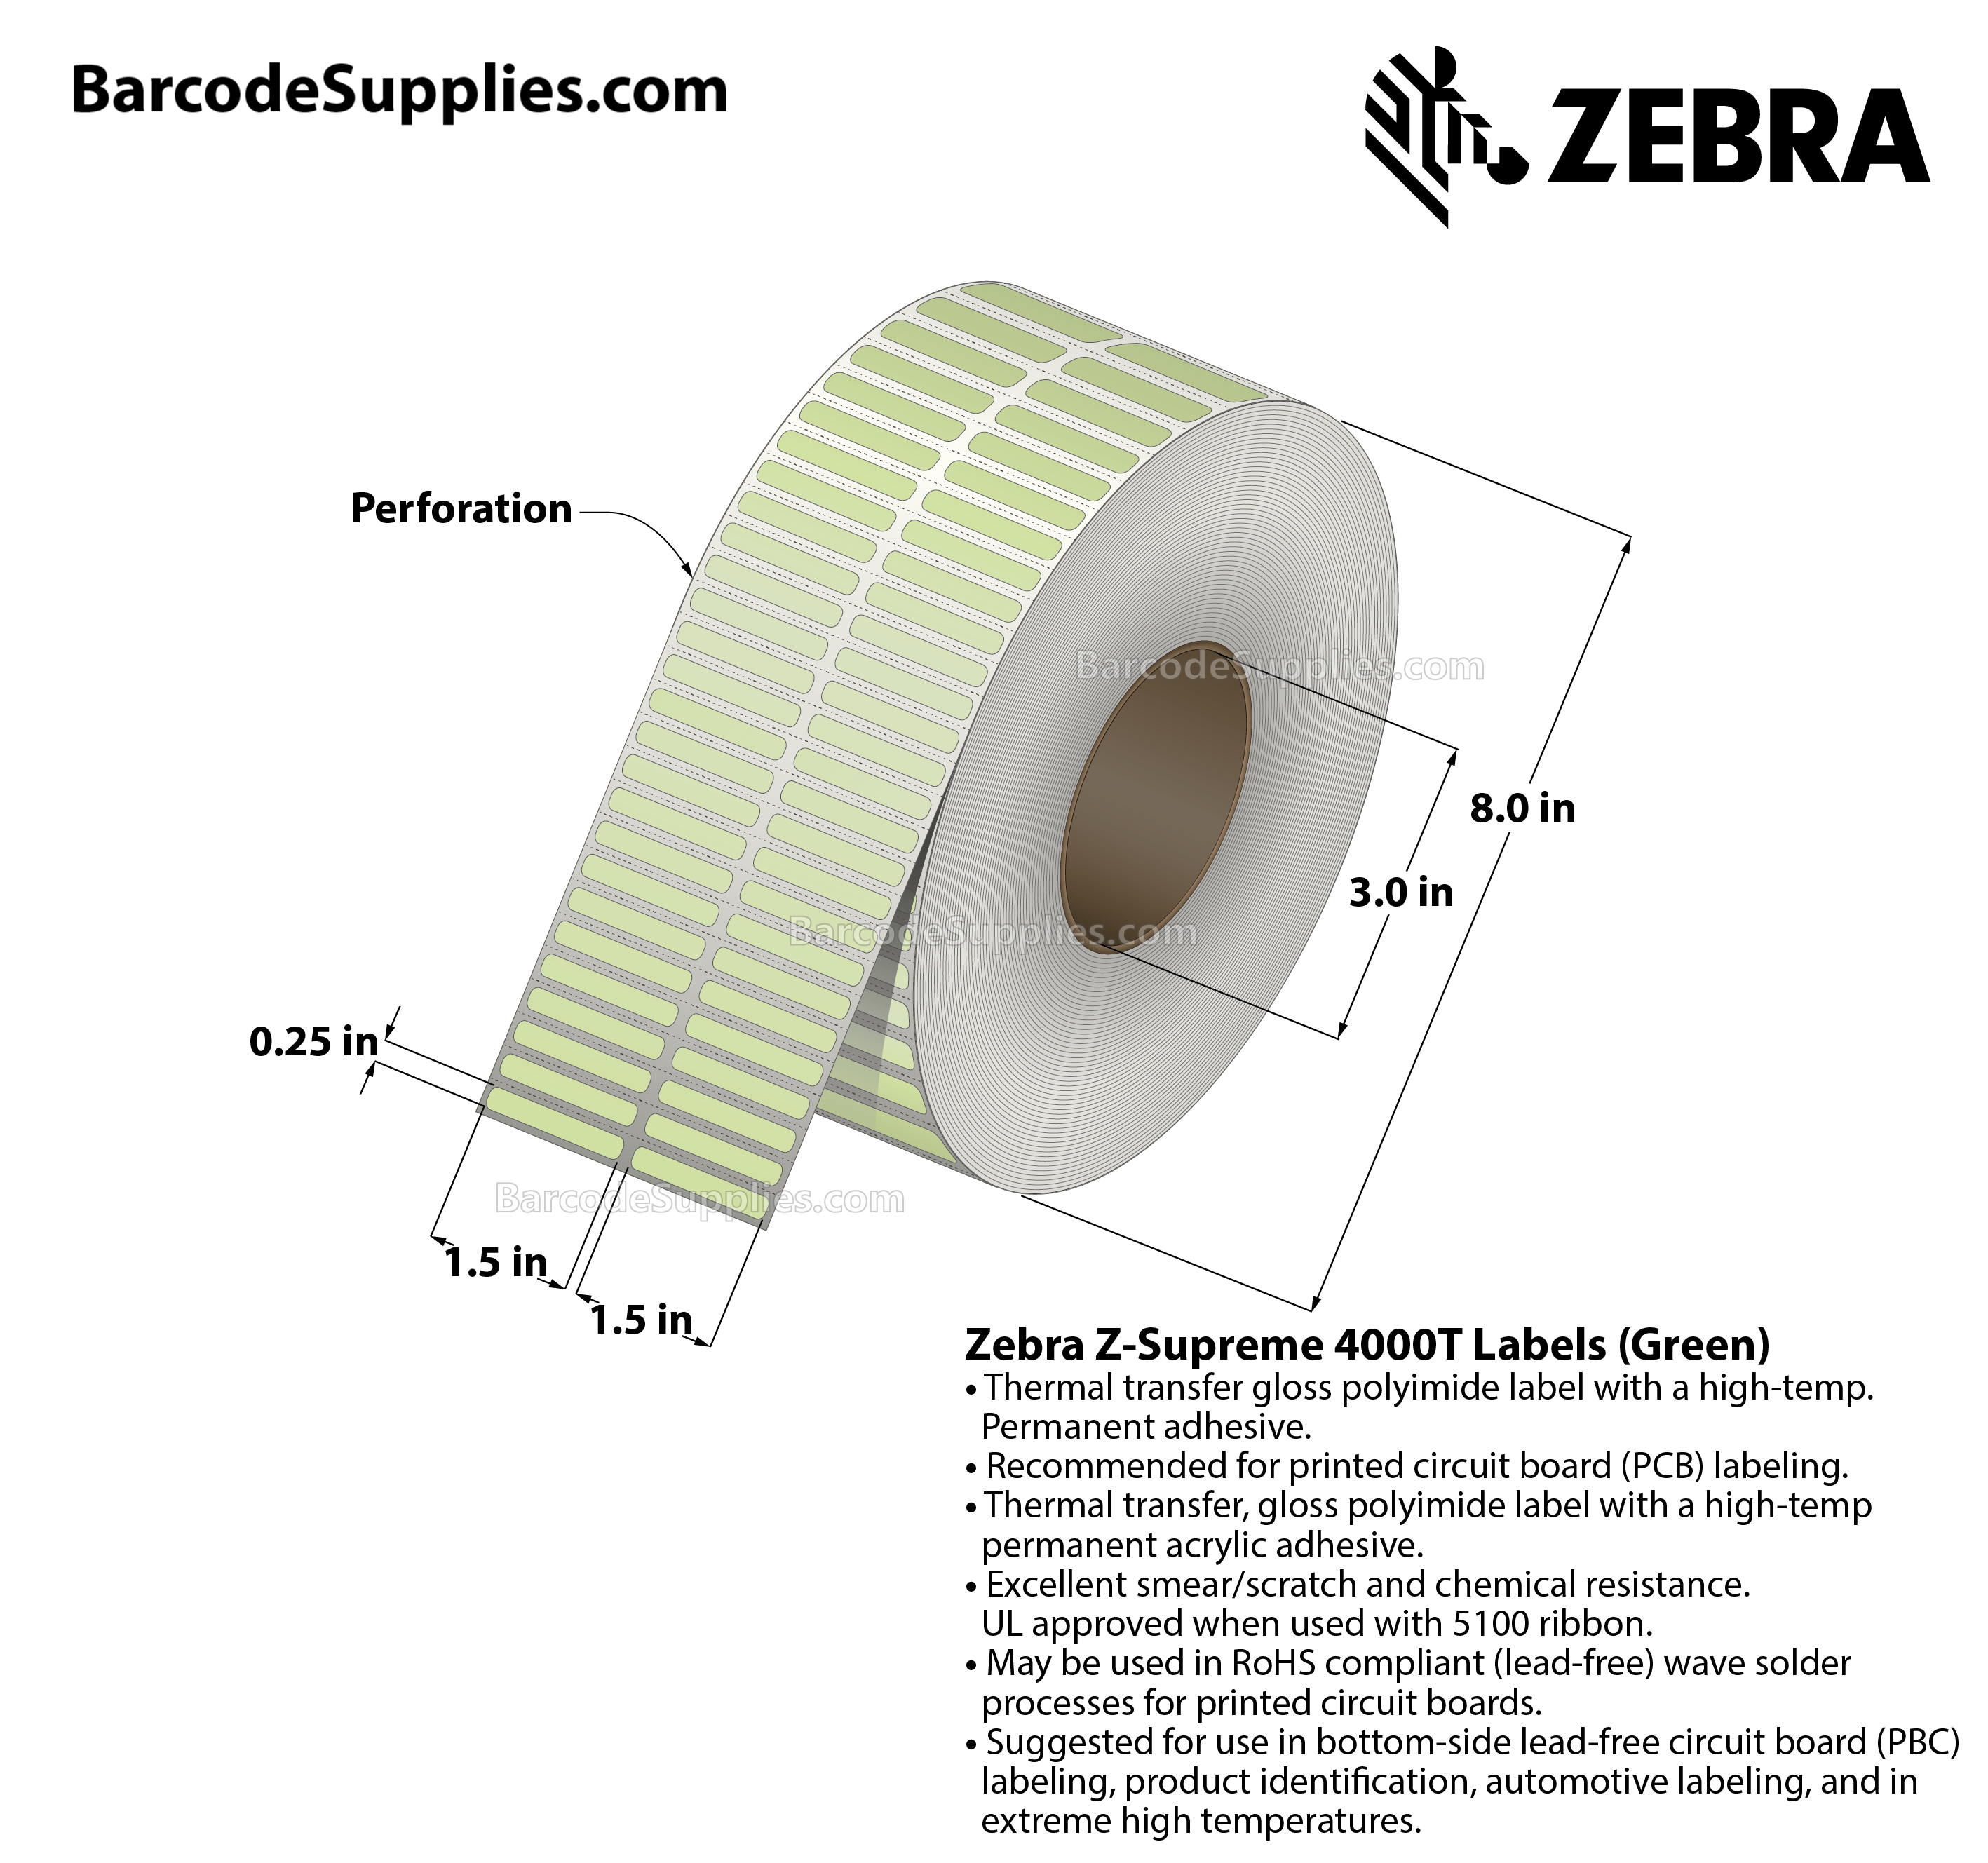 1.5 x 0.25 Thermal Transfer Green Z-Supreme 4000T Green (2-Across) Labels With High-temp Adhesive - Perforated - 10000 Labels Per Roll - Carton Of 1 Rolls - 10000 Labels Total - MPN: 10023321